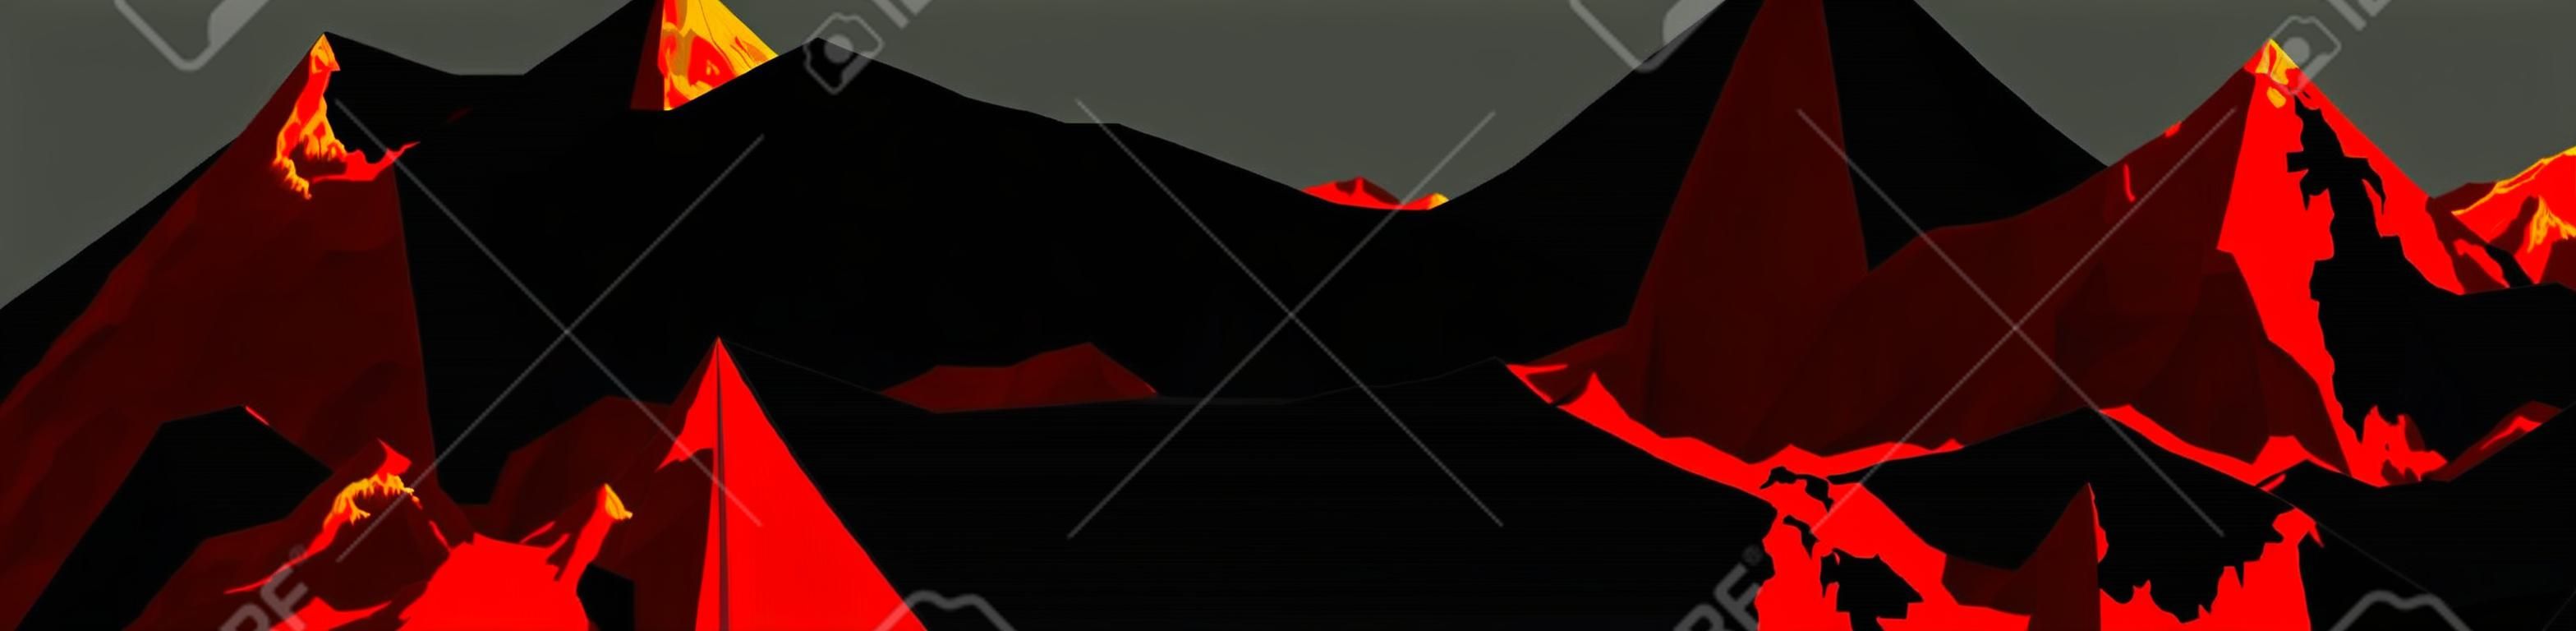 Abstract  of mountain ranges, volcano with lava landscape, red and black tones. Vector background